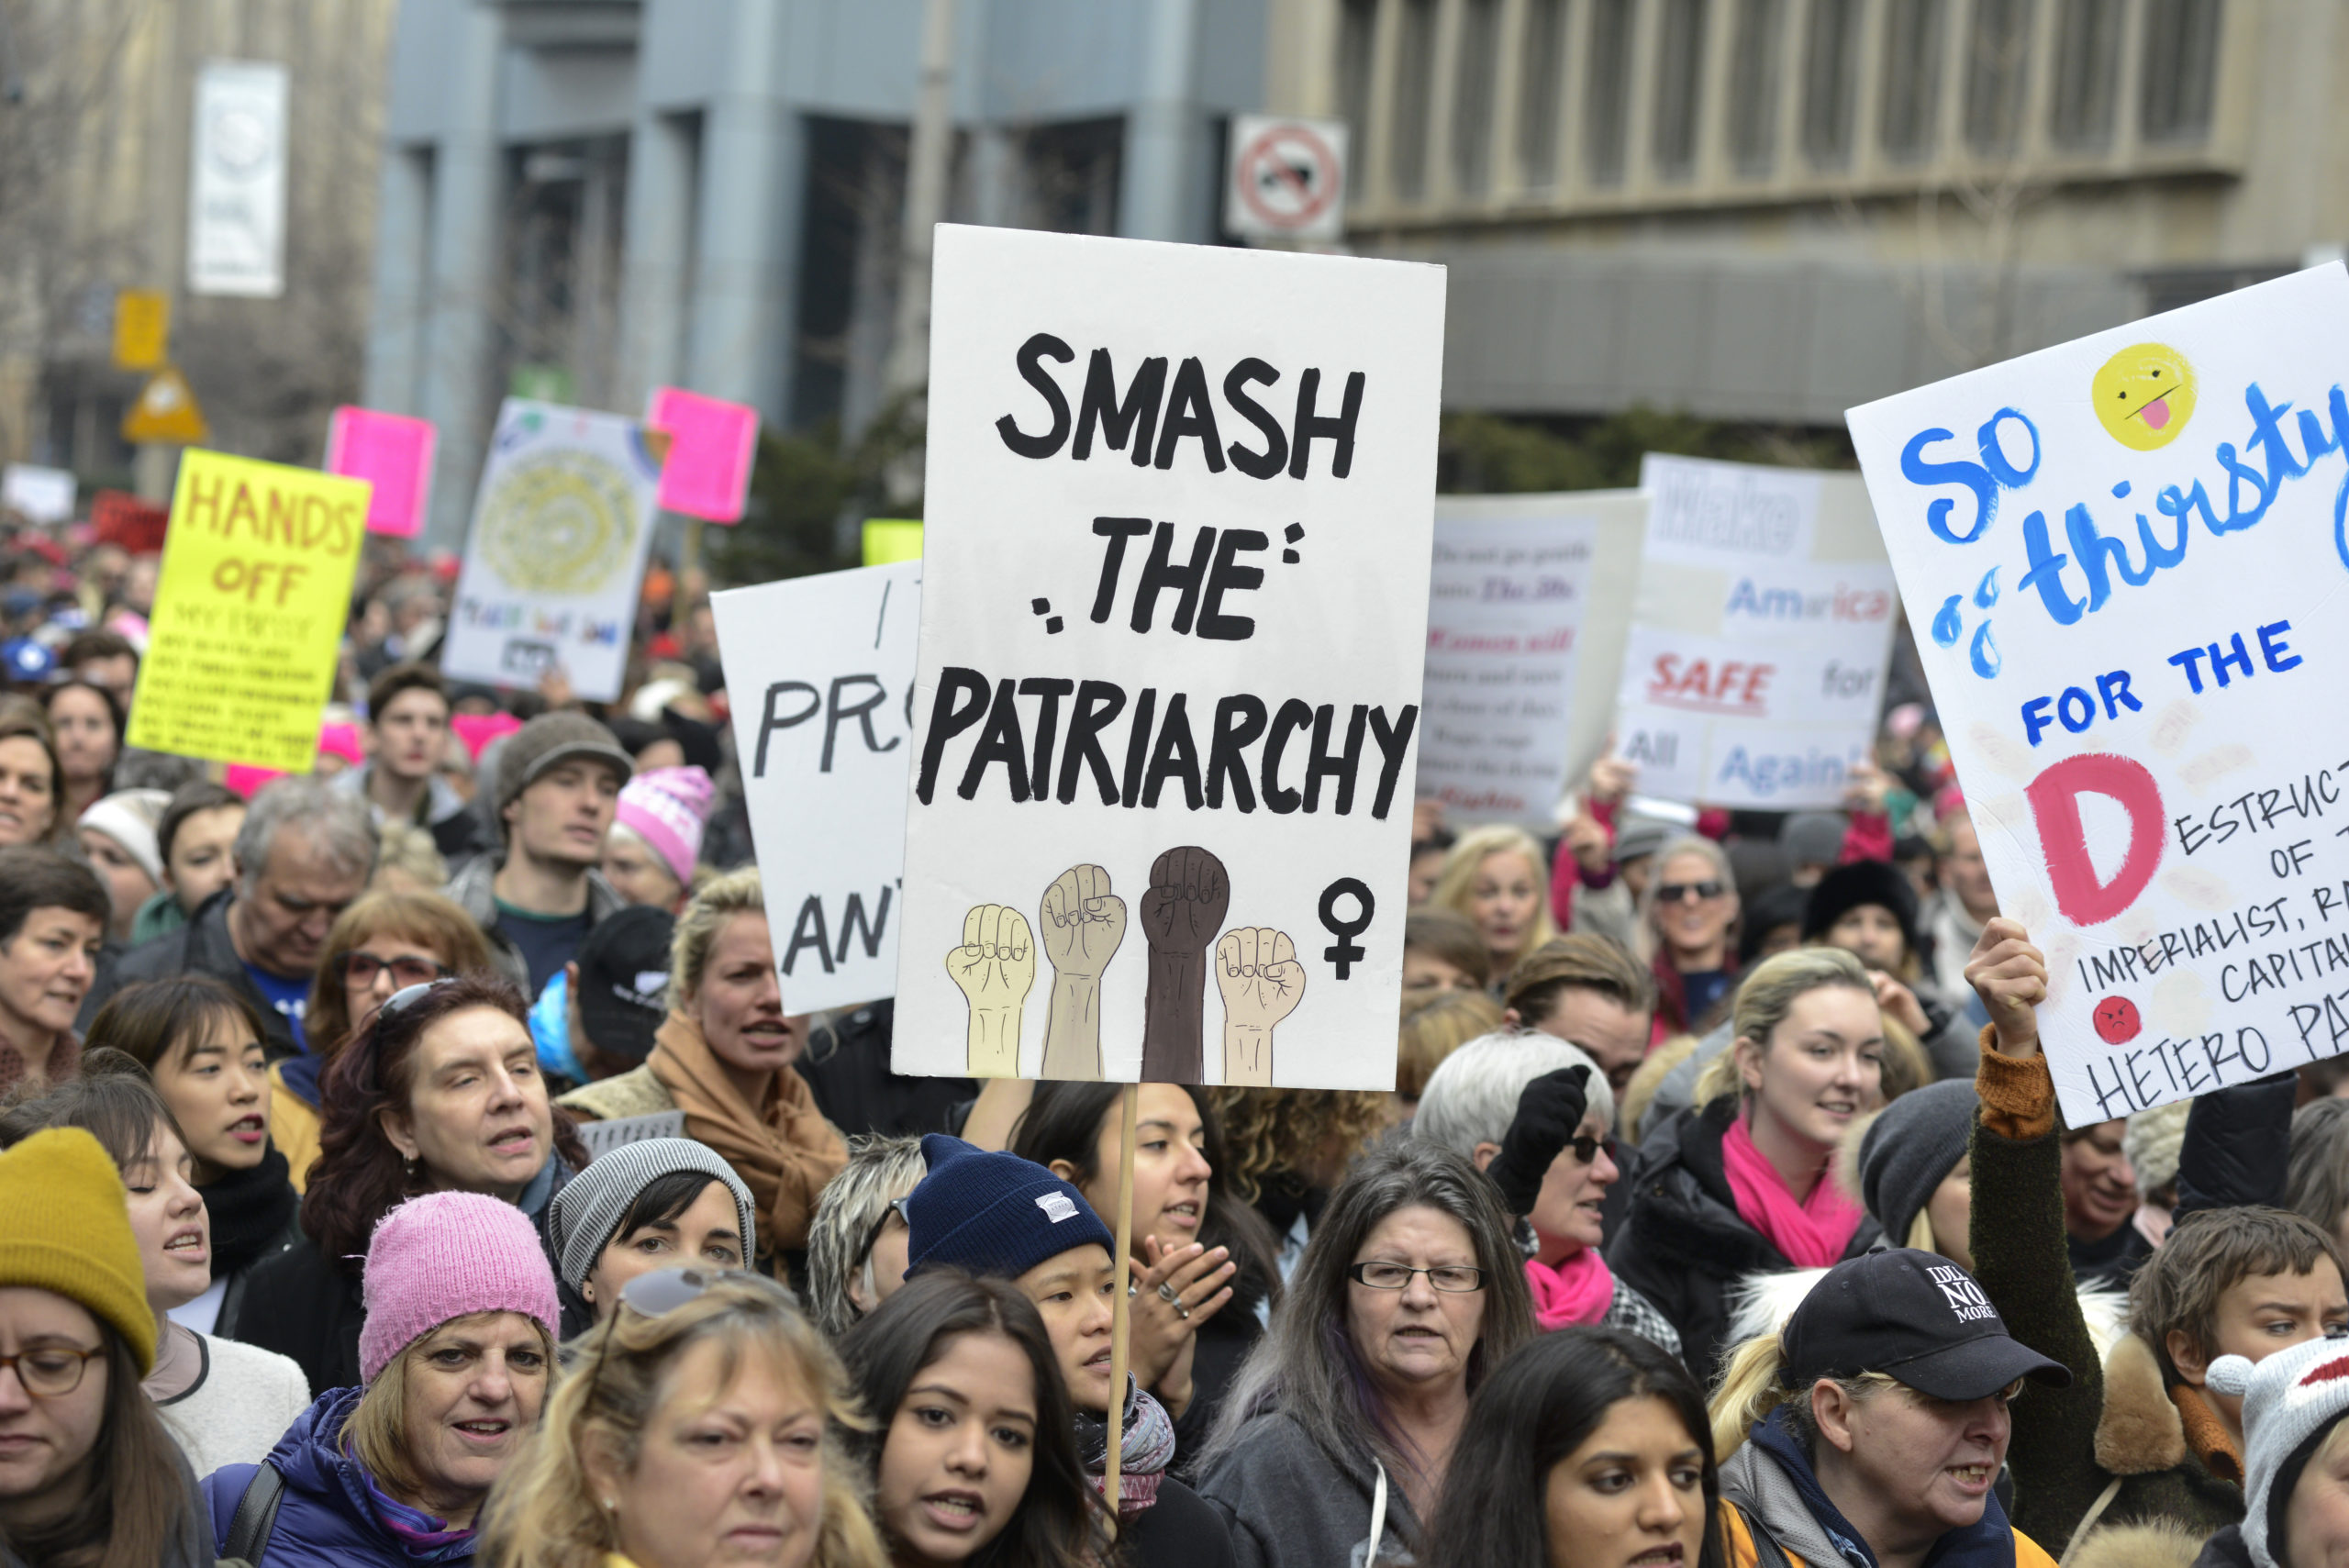 Toronto-january,21:protesters,With,Sign,Denouncing,The,"patriarchy",In,The,Society